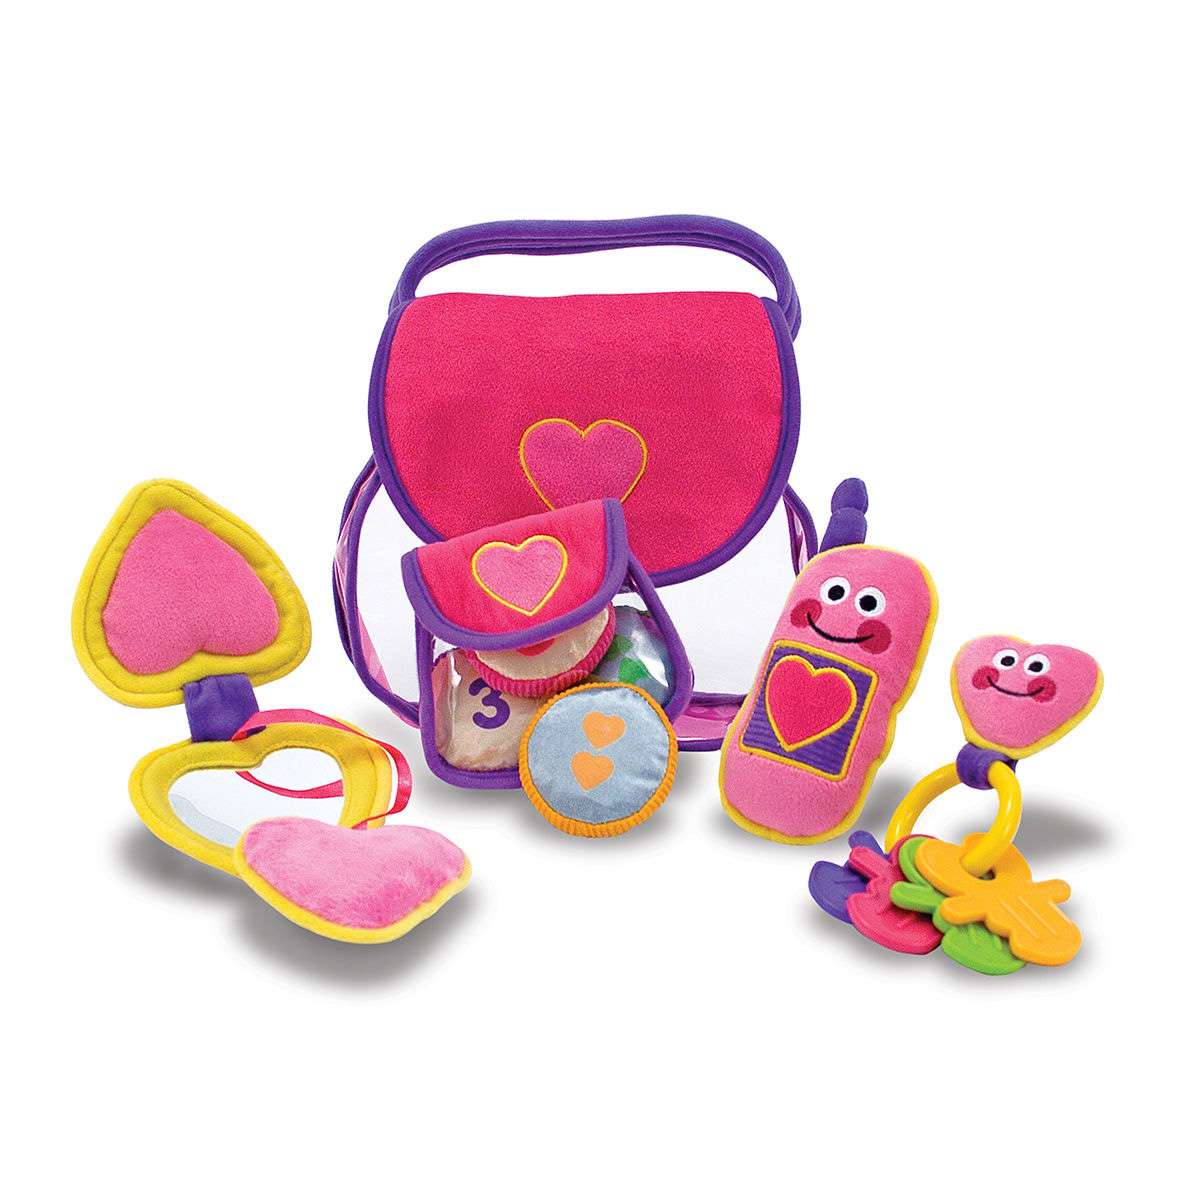 Melissa and Doug Kids Toys, Pretty Purse Fill and Spill